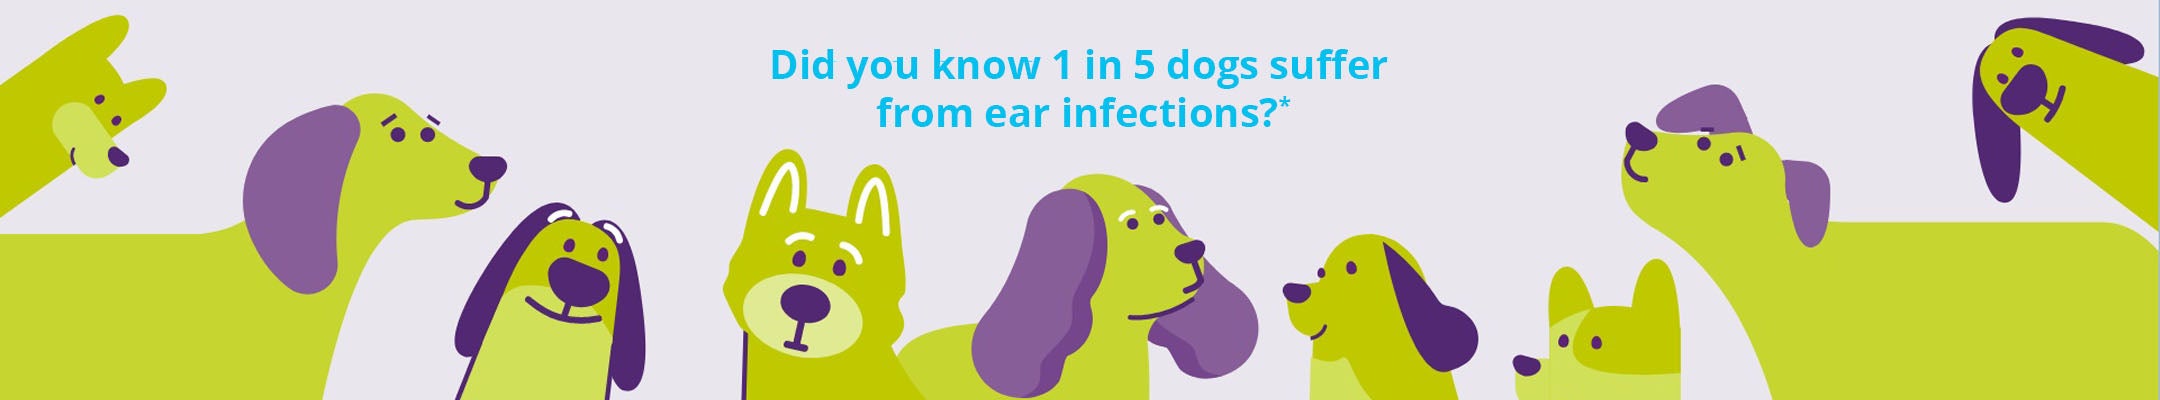 Ear infections in dogs can be painful